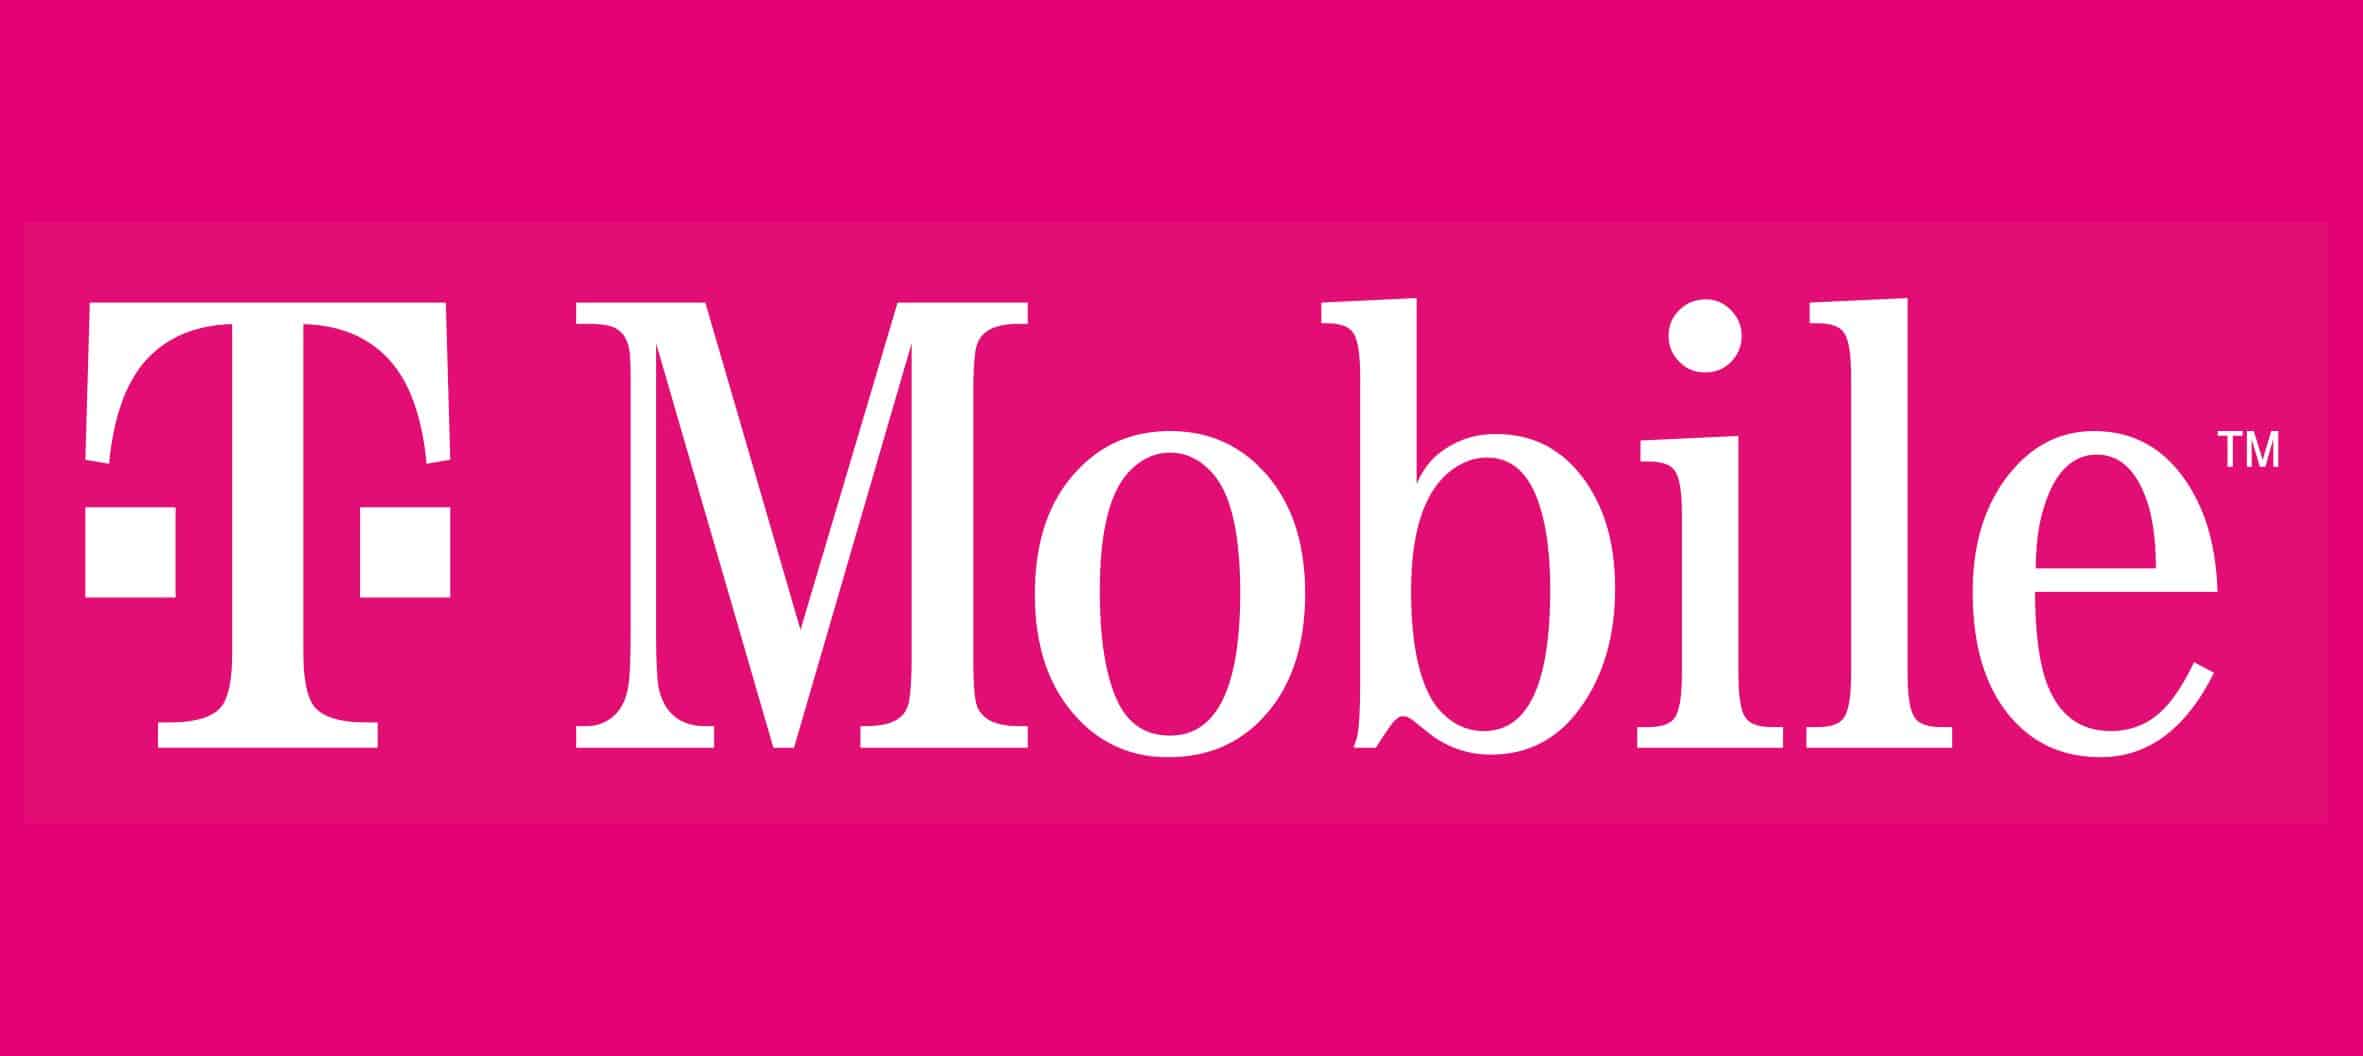 t-mobile-offering-free-or-half-price-upgrade-to-iphone-12-for-existing